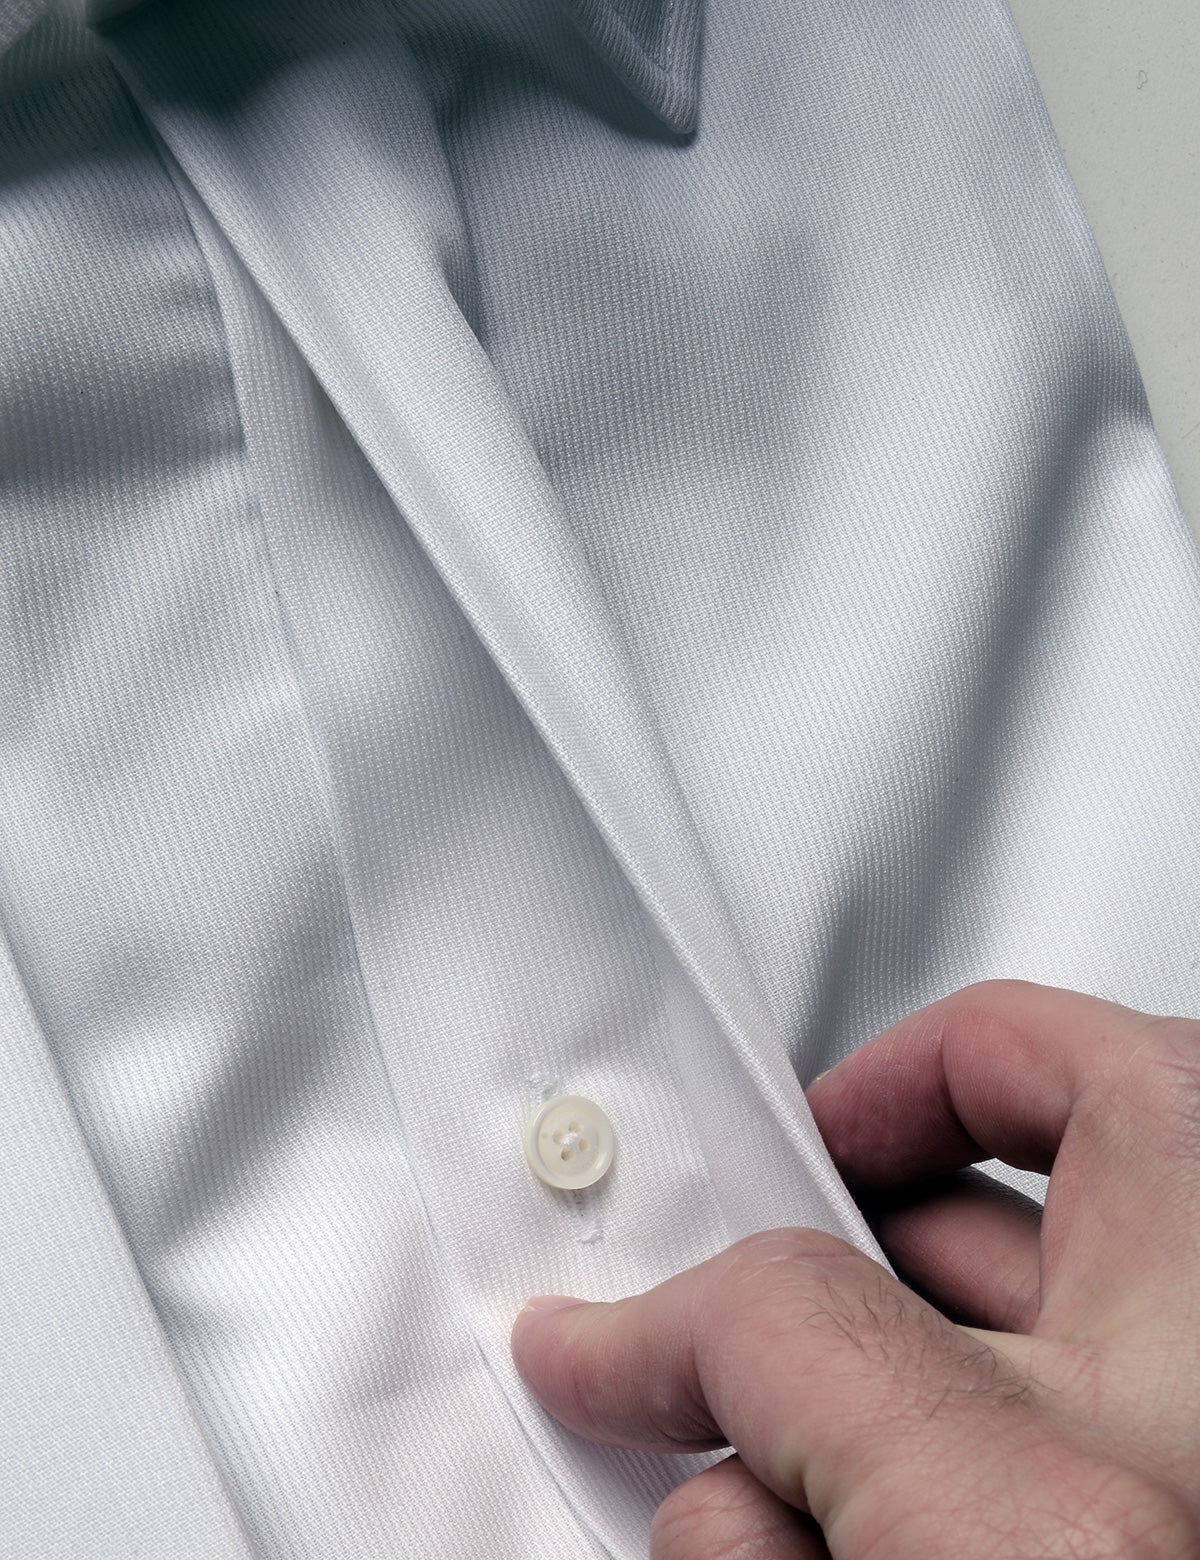 Detail showing hand moving covering to reveal buttons underneath on French Cuff Tuxedo Shirt With Covered Buttons - Bar Pique